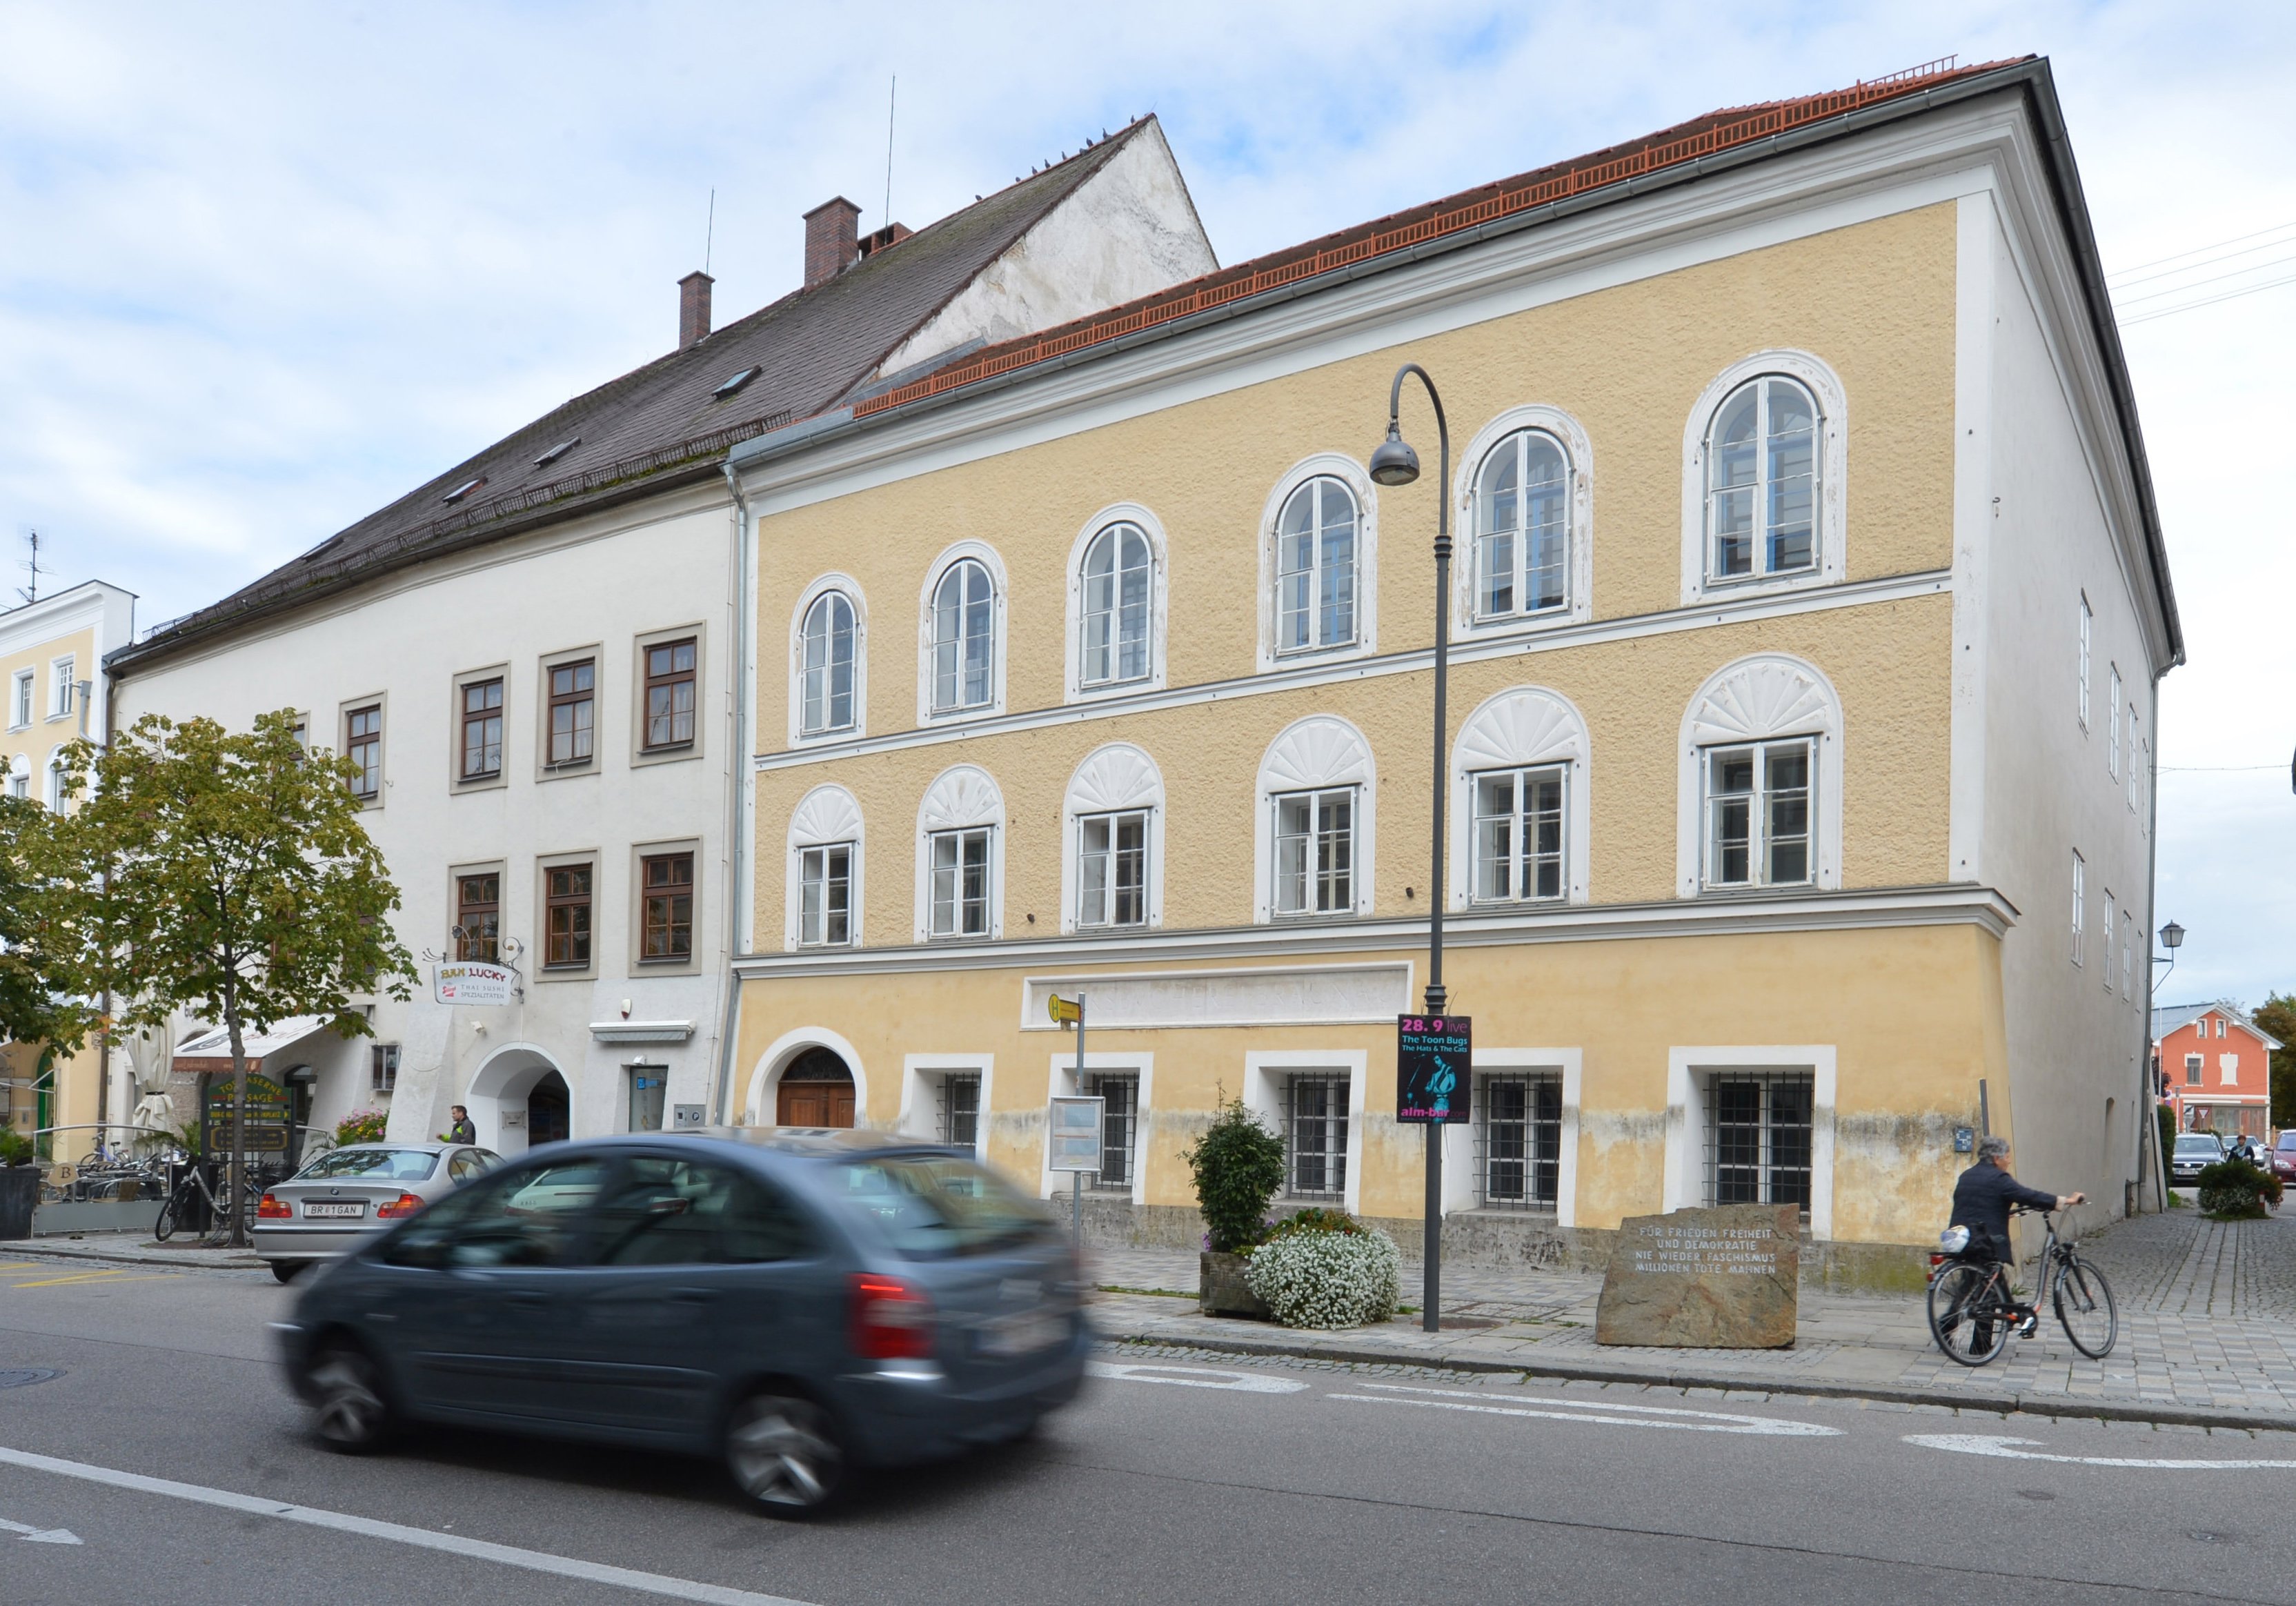 Hitler's house will be turned into the Holocaust museum